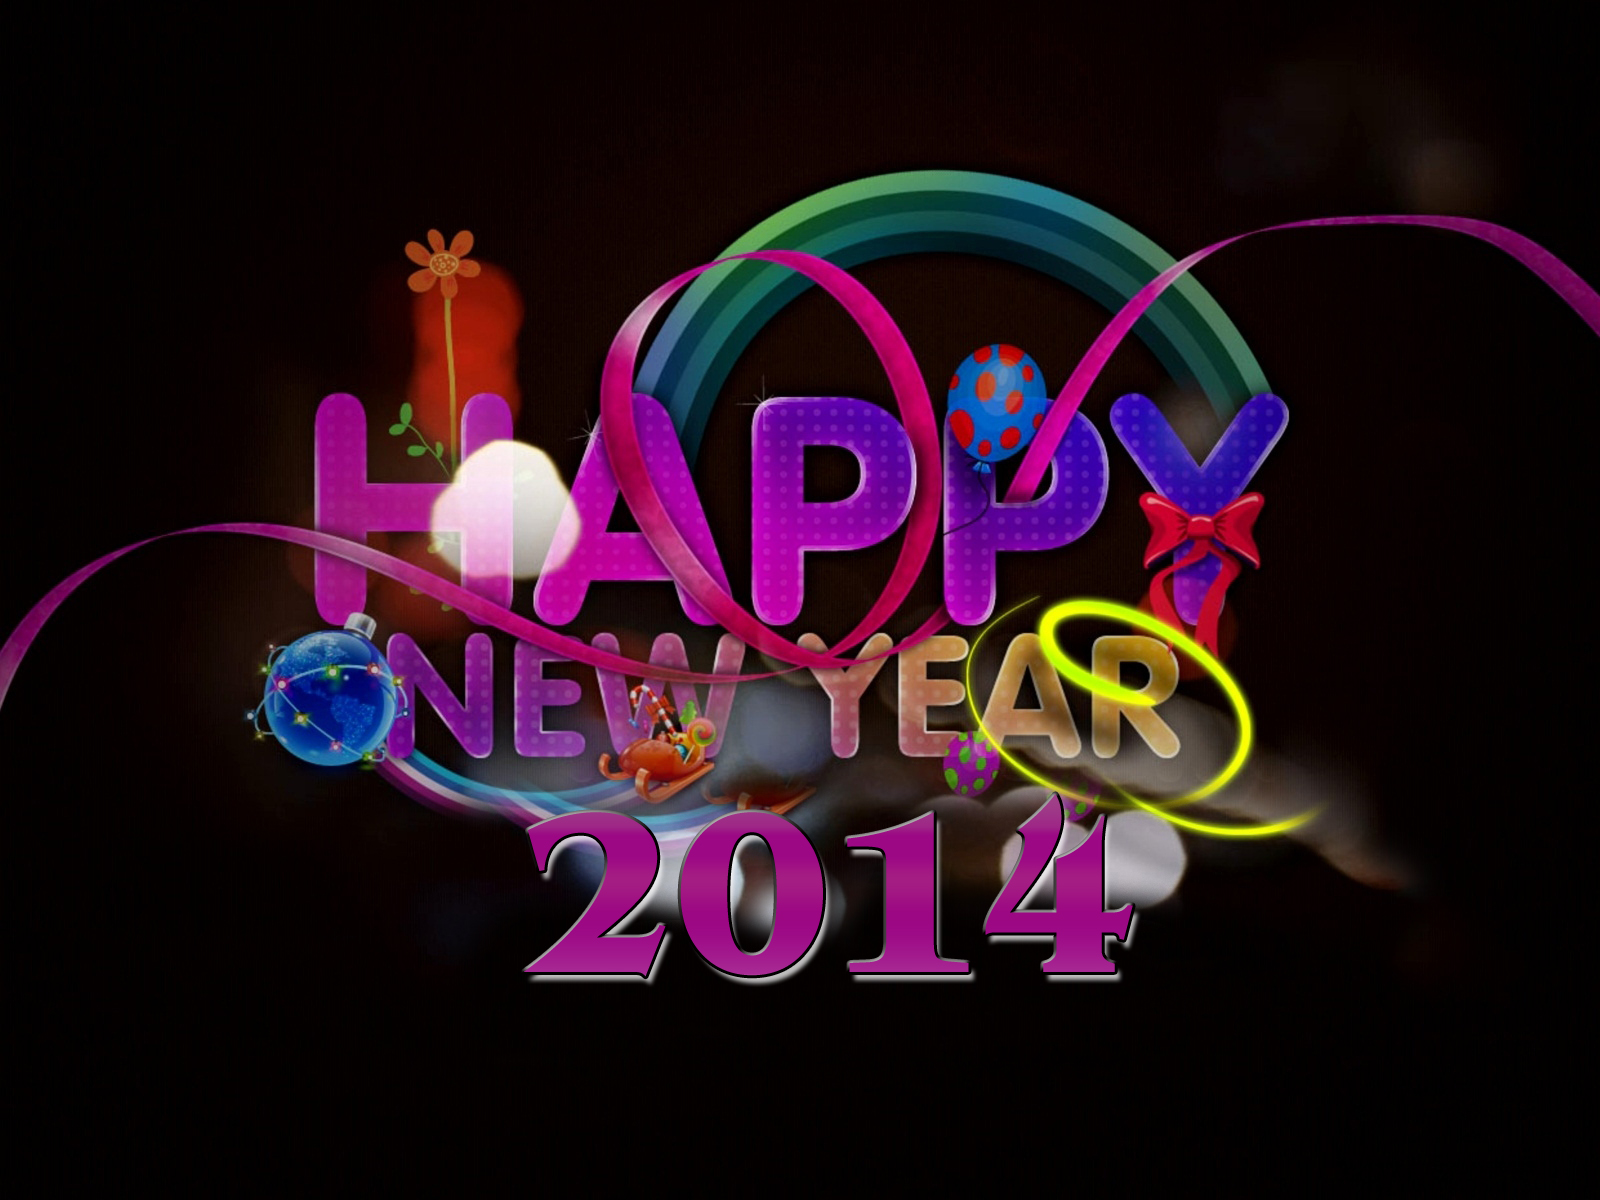 Free Download Hd Wallpaper Happy New Year 2014 Image - Happy New Year Facebook Profile , HD Wallpaper & Backgrounds